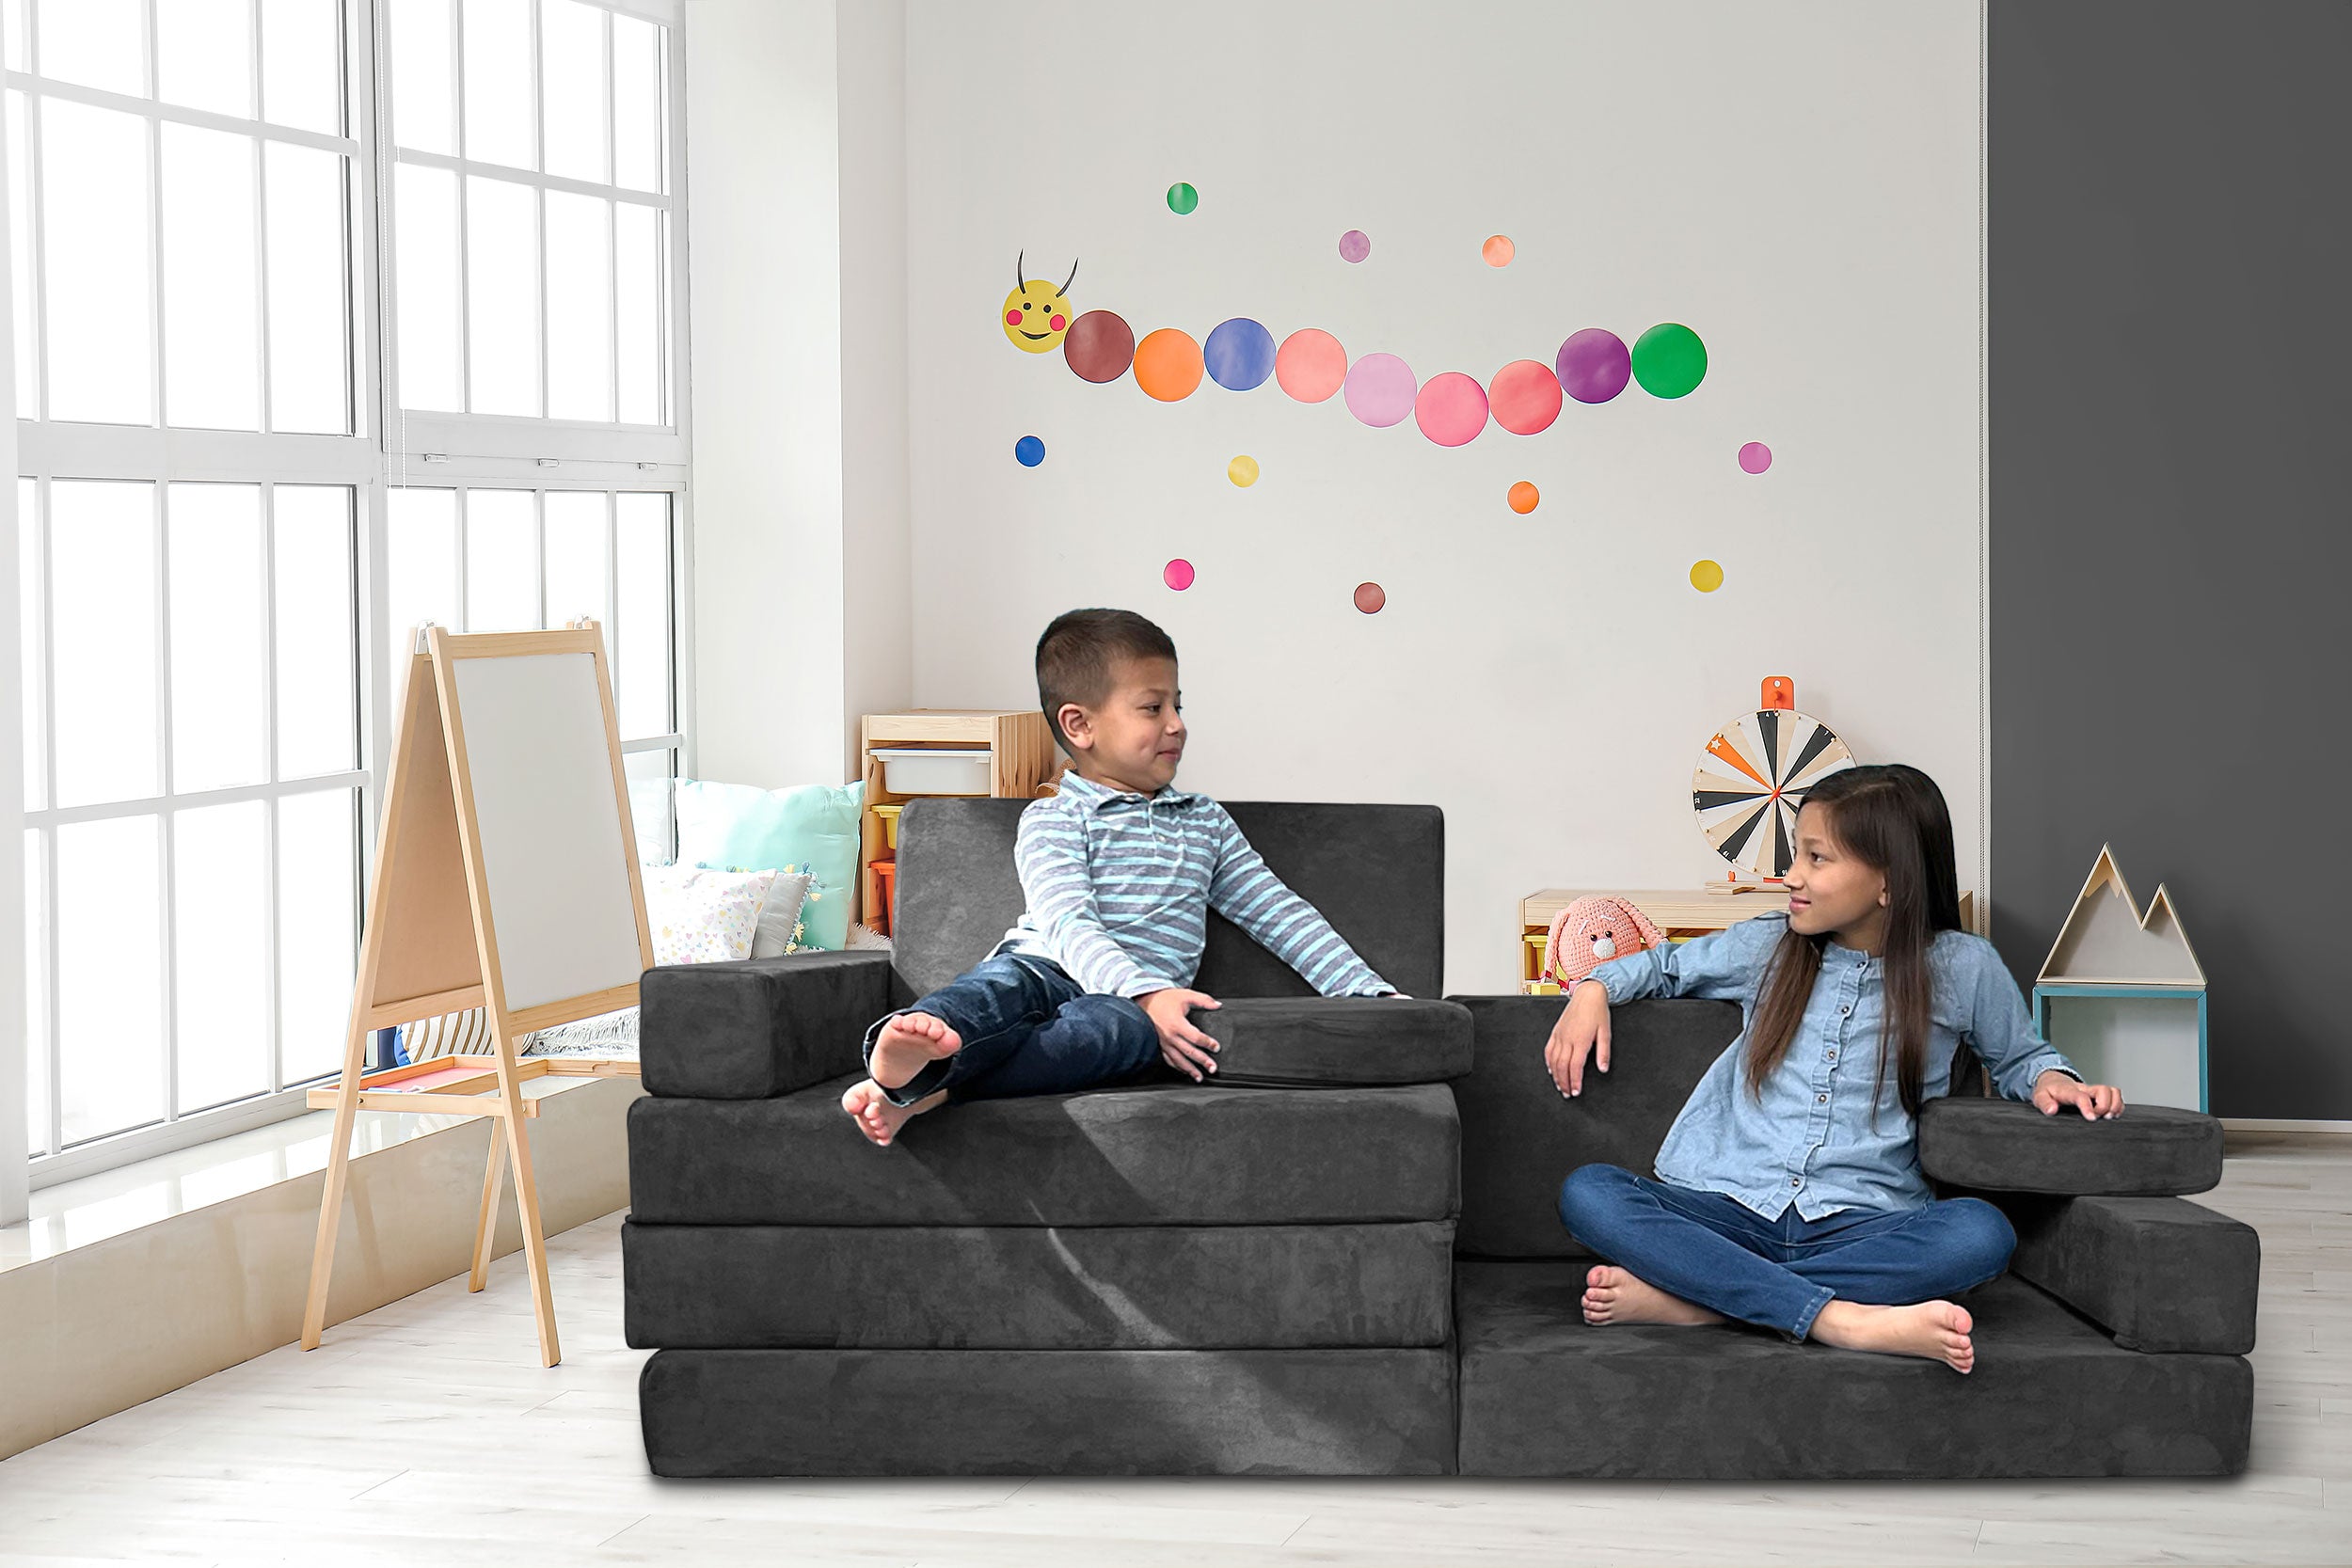 Young boy and girl interacting on gray Mod Blox 10-piece modular sofa with gray covers in a vibrant playroom setting.